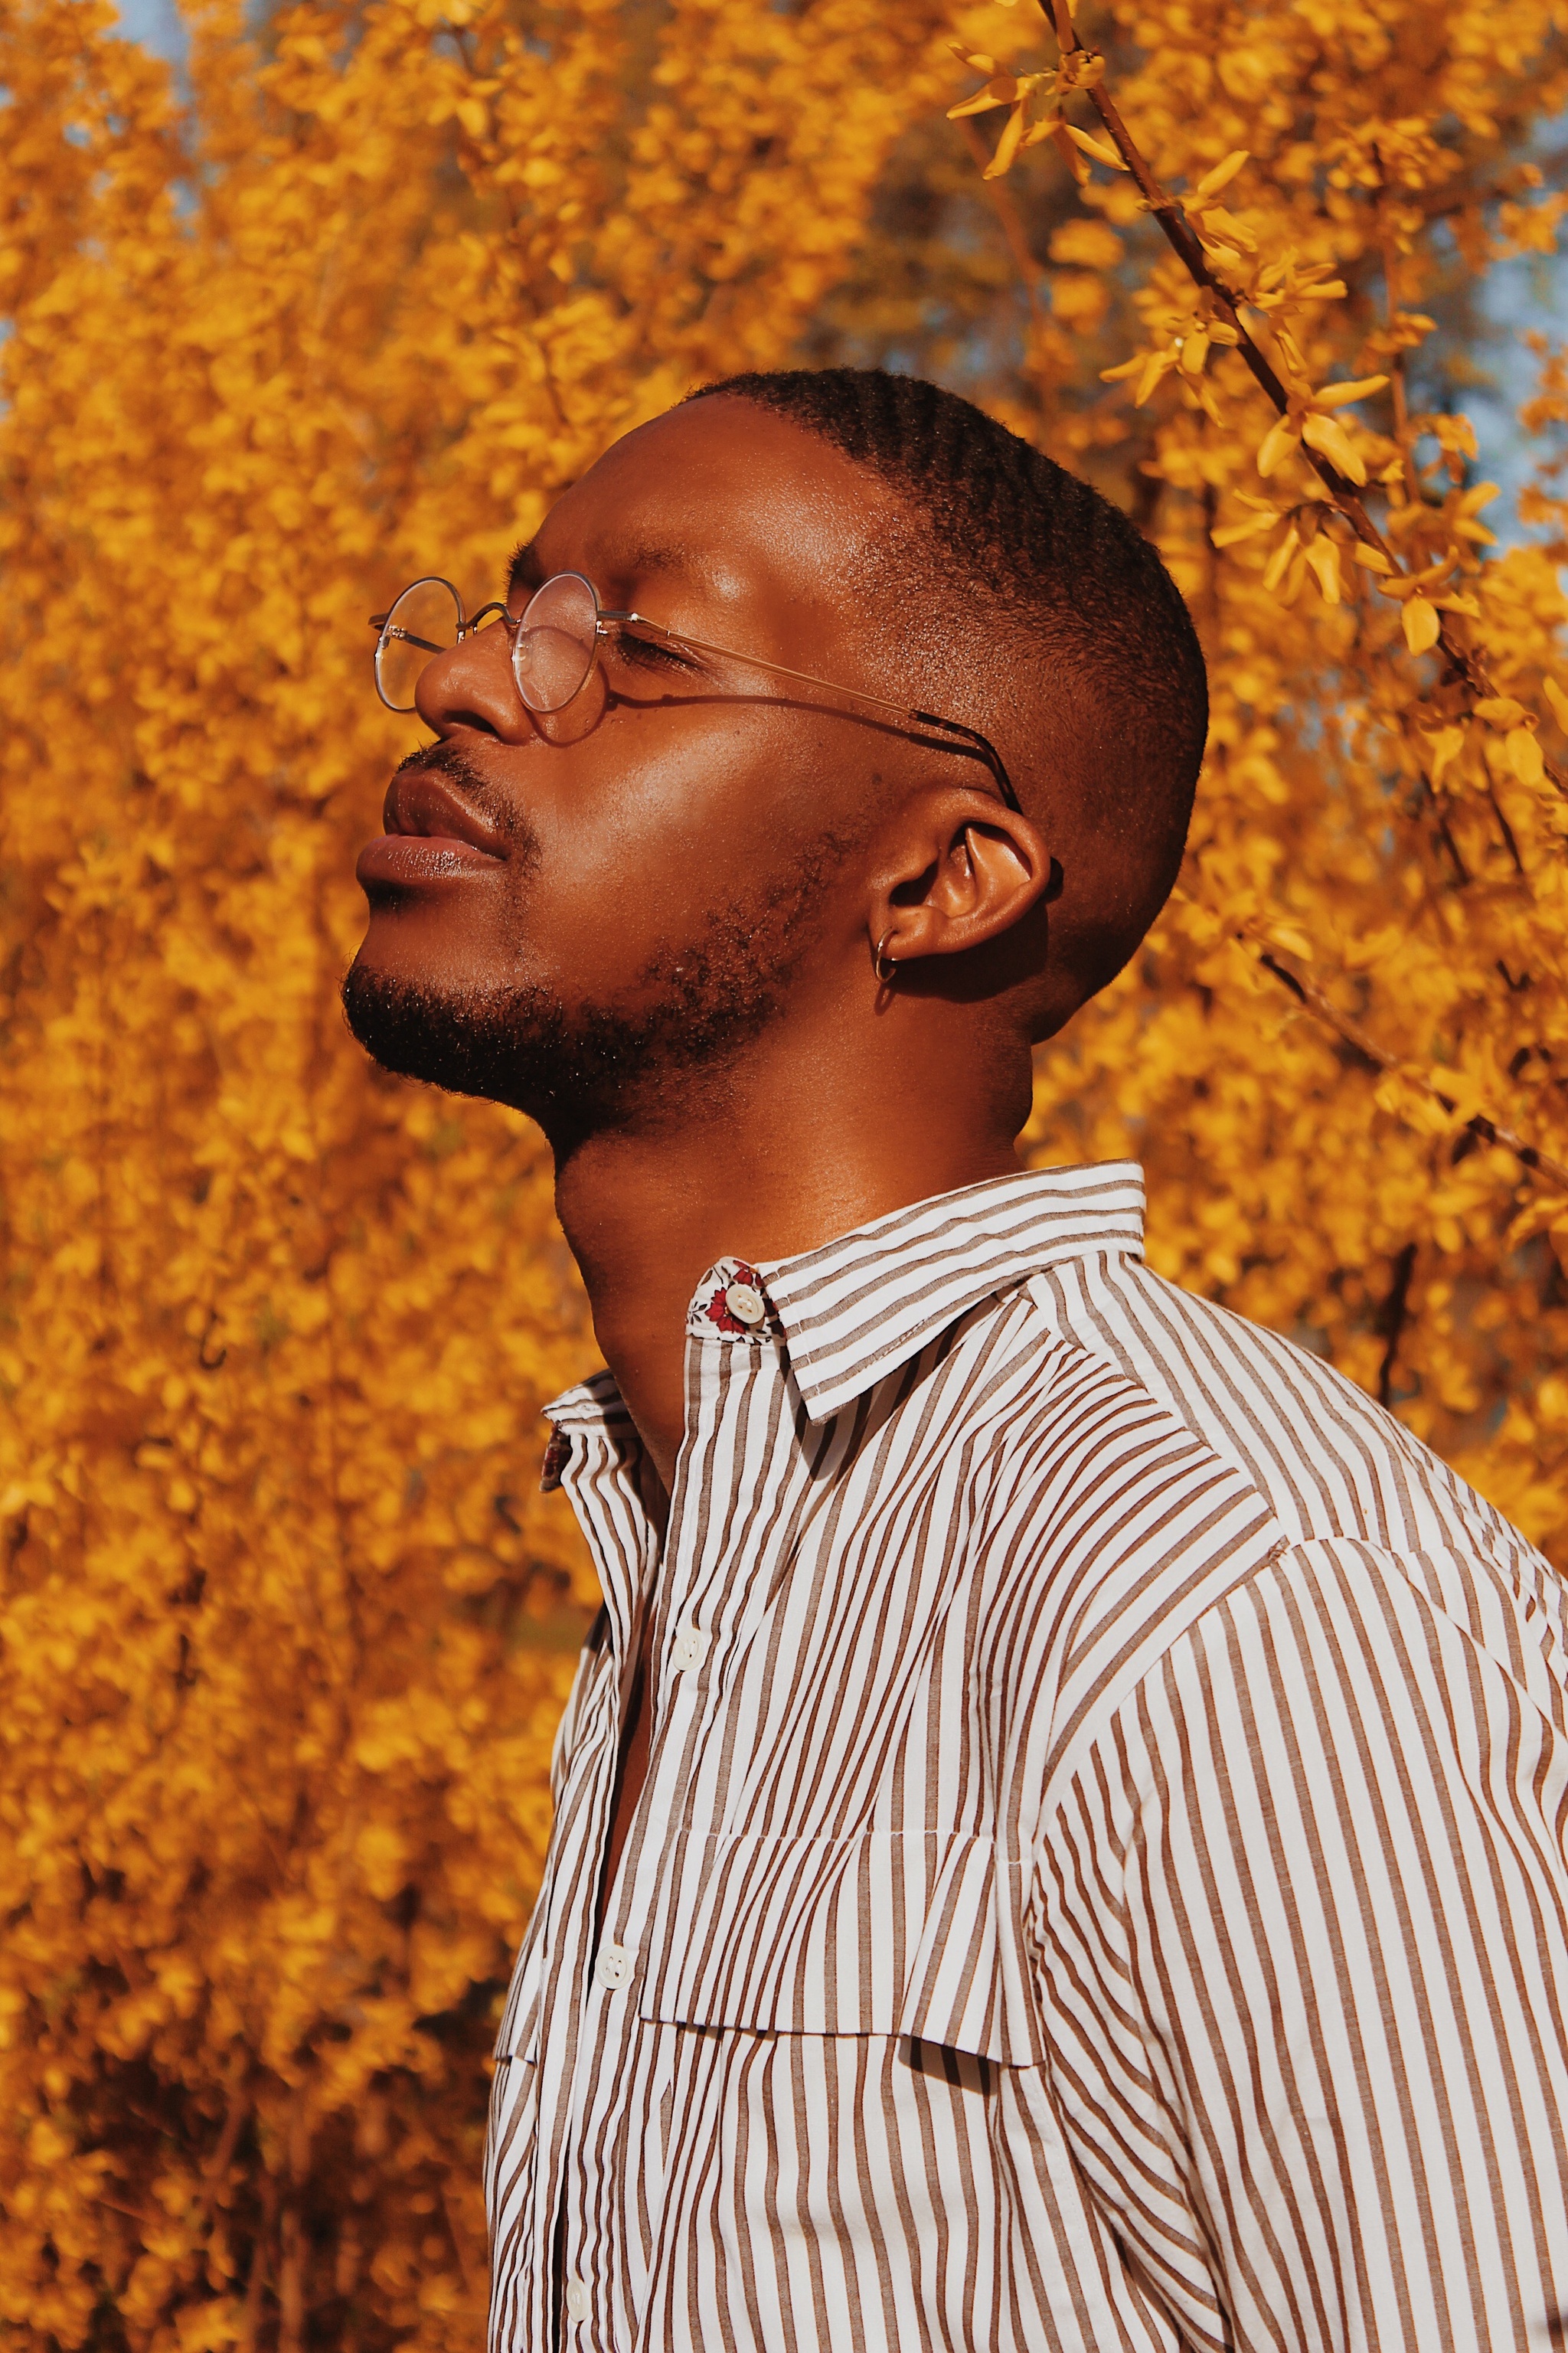 A portrait of singer Josh Walker who lifts his head toward sunlight with his eyes closed. He wears glasses and a striped button down shirt. A tree's golden leaves fill the background.